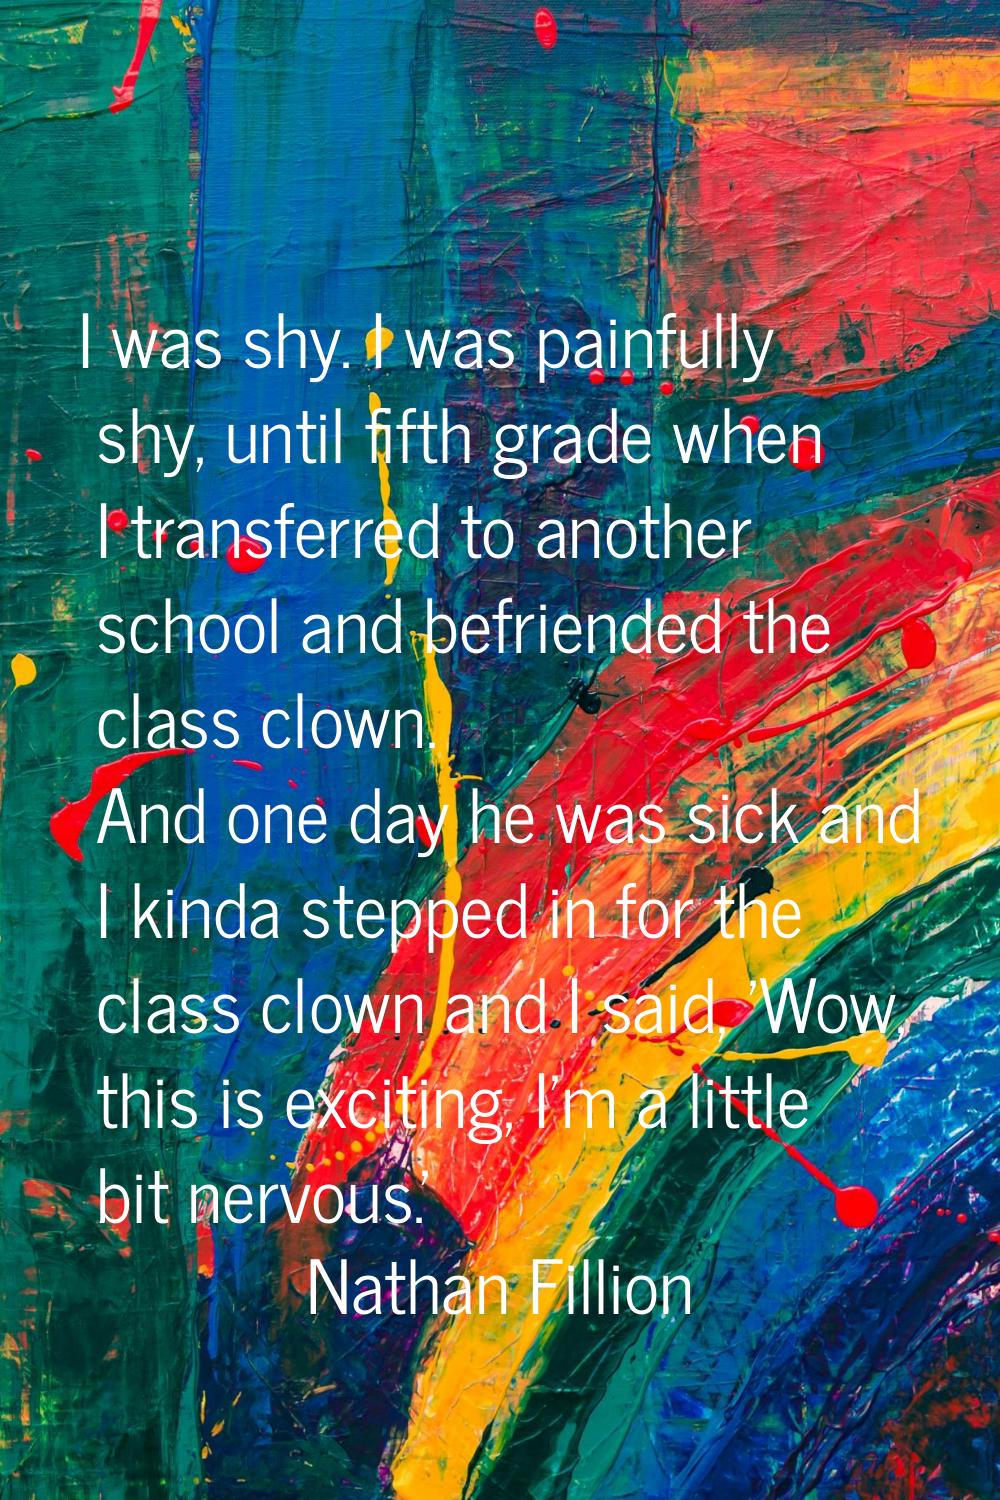 I was shy. I was painfully shy, until fifth grade when I transferred to another school and befriend